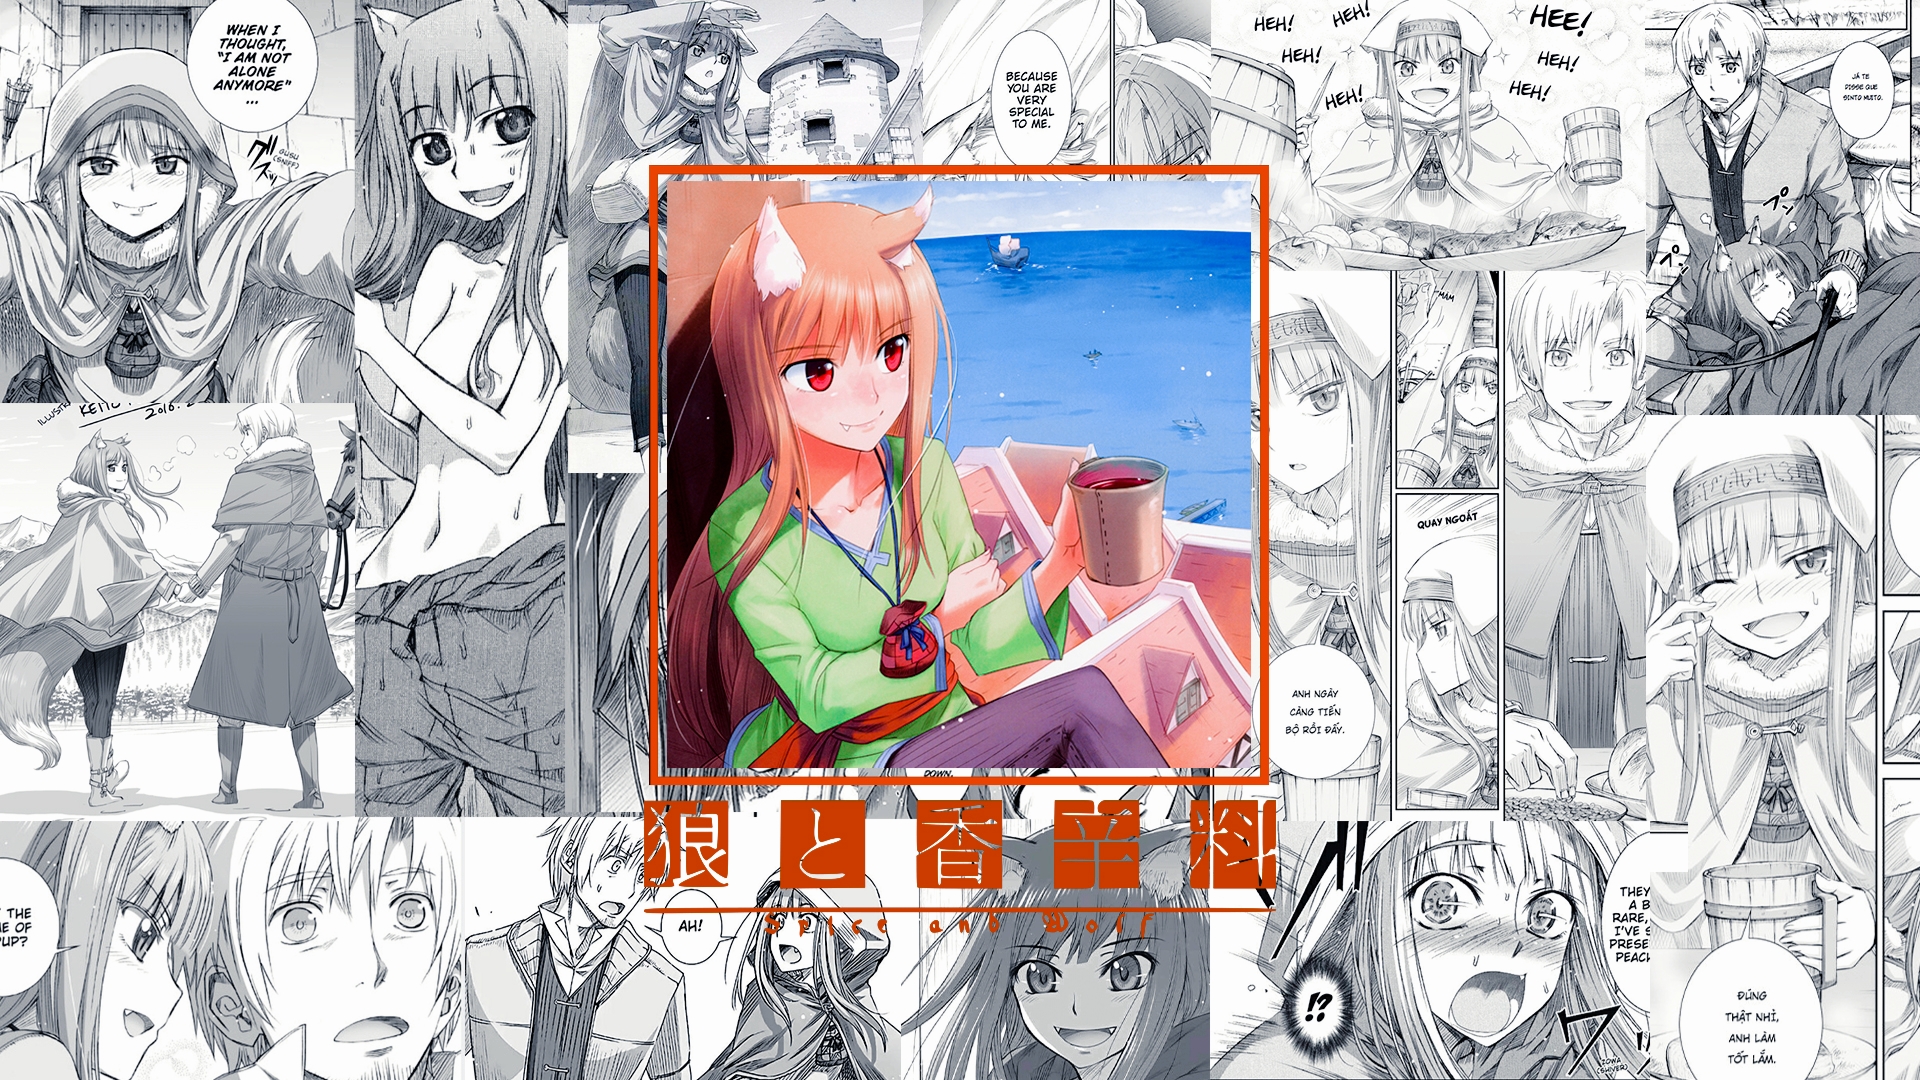 Spice And Wolf Anime Girls Holo Spice And Wolf Wolf Girls Smiling Text Manga Long Hair Japanese 1920x1080